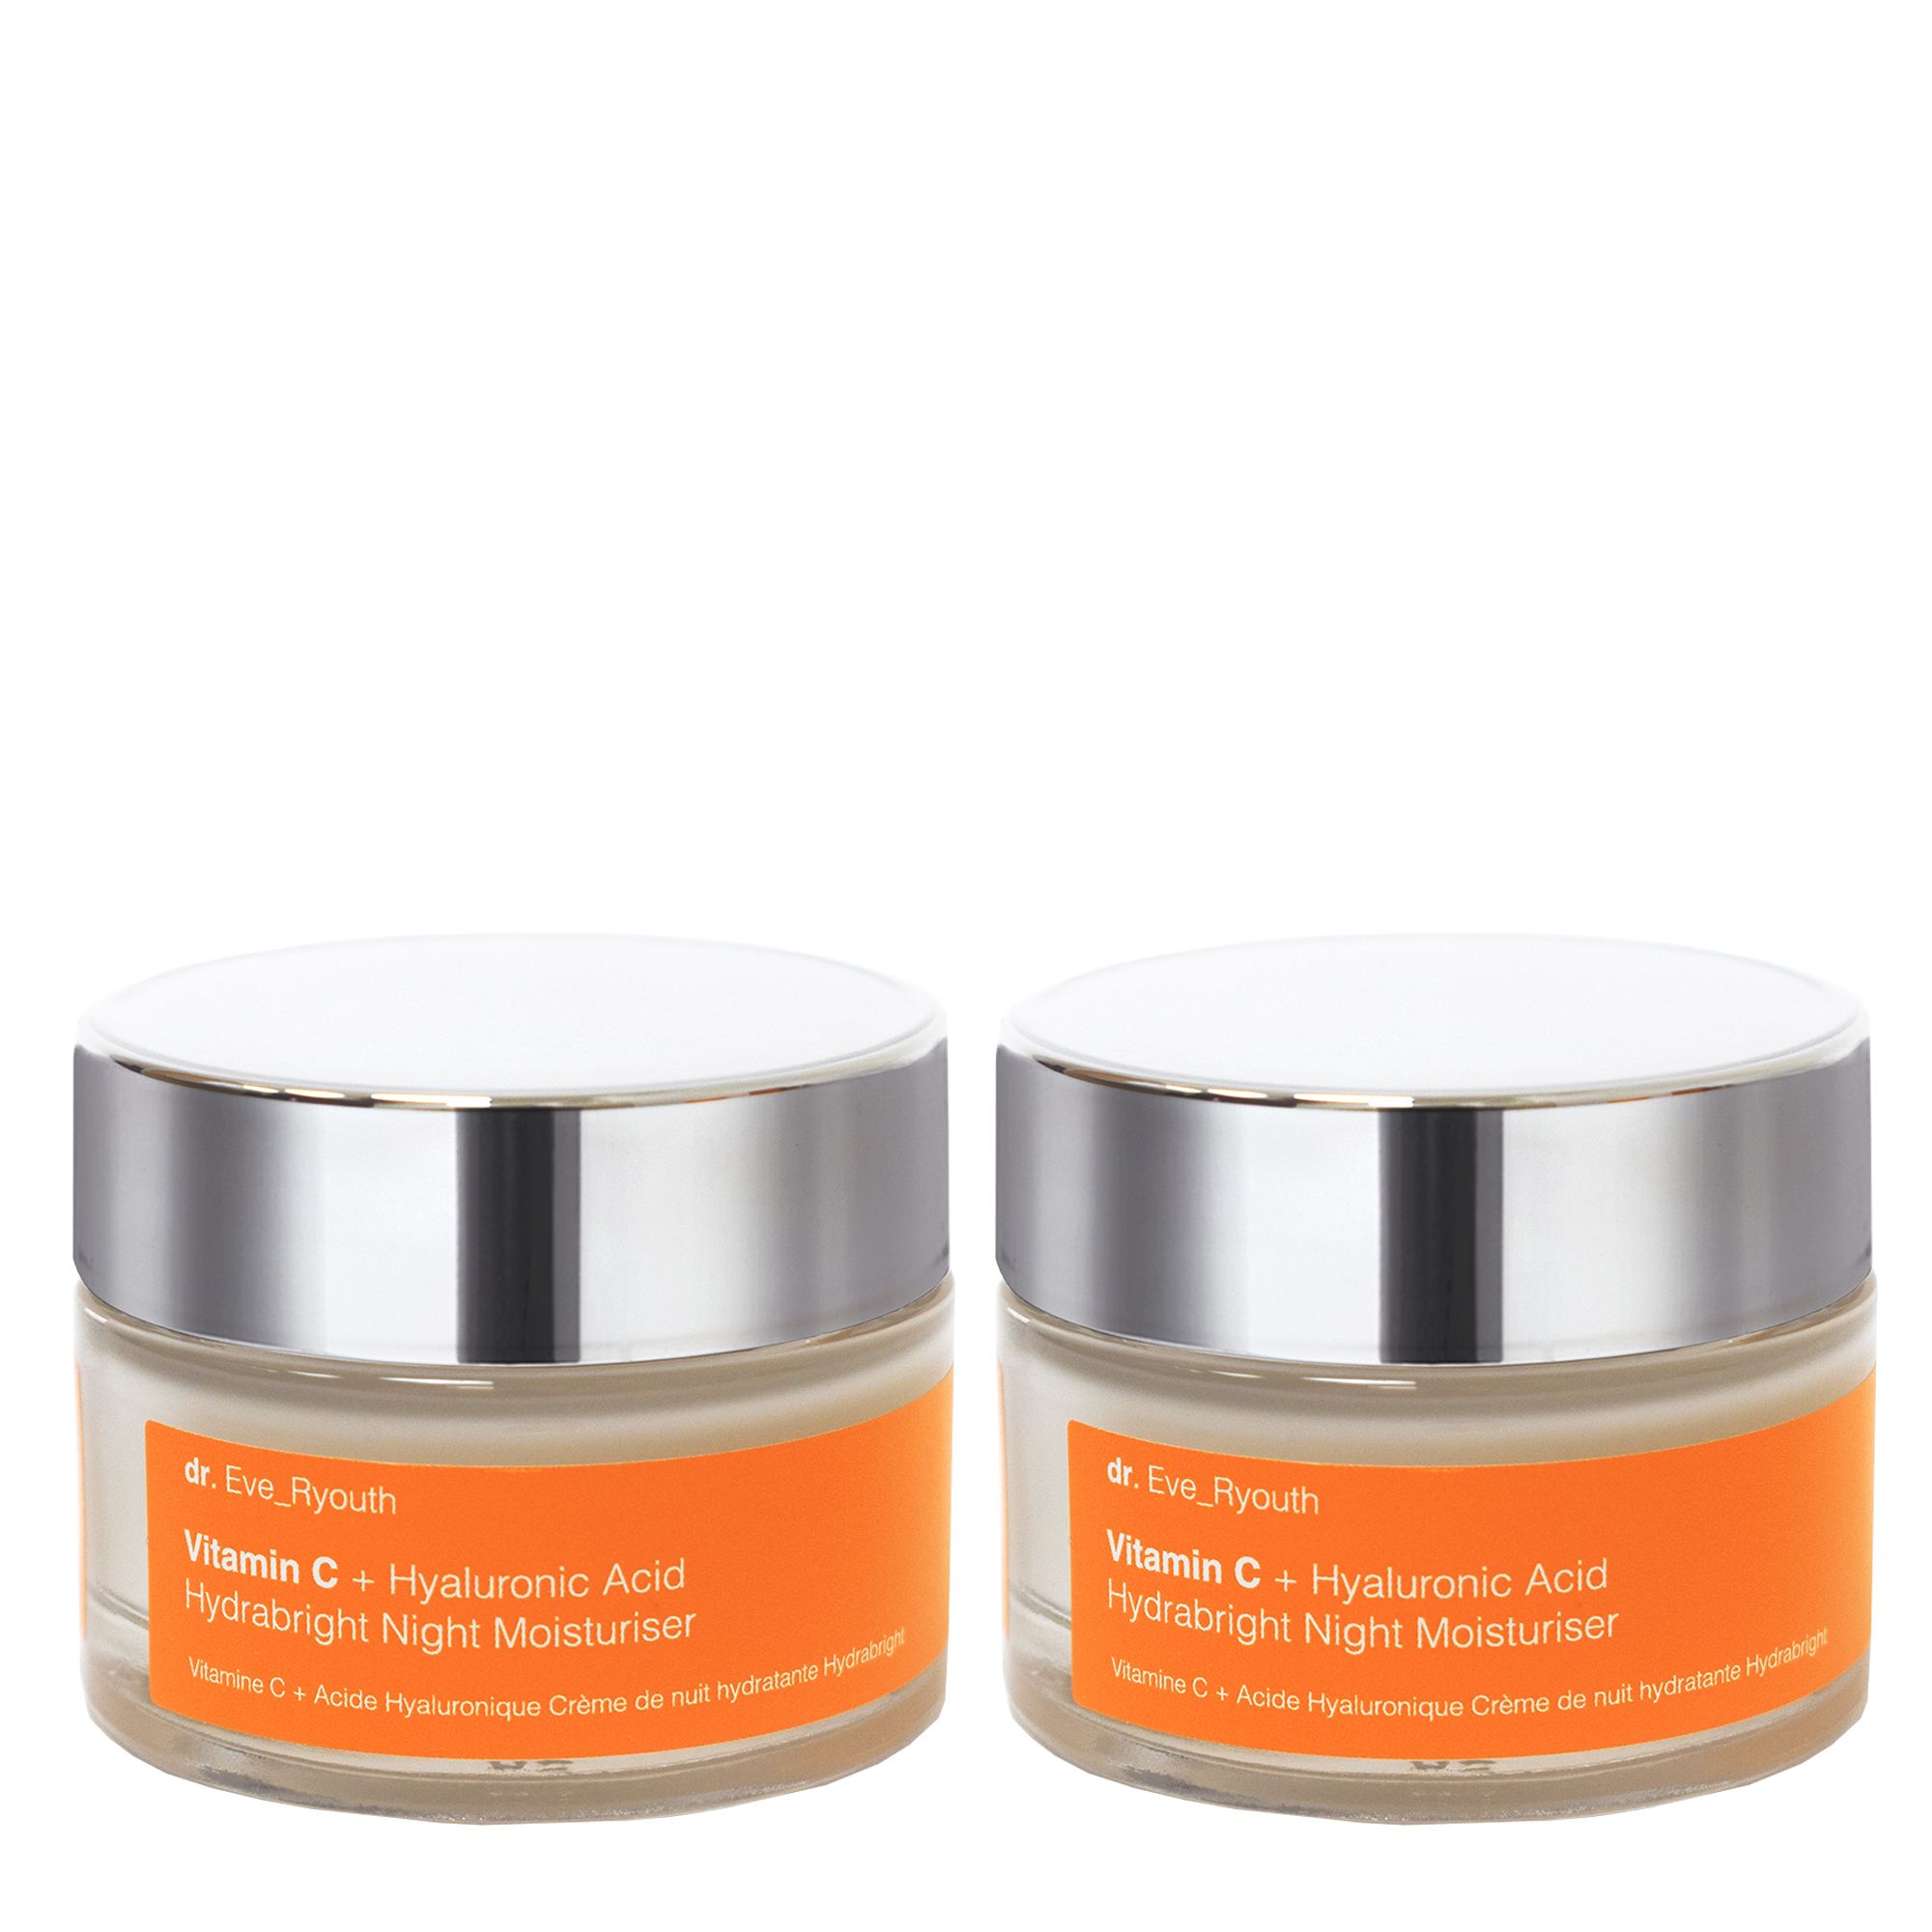 Vitamin C + Hyaluronic Acid Hydrabright Night Moisturiser 50ml

Formulated for:
Uneven skin tone
Sun & age spots
Dehydrated skin

Hydrabright night moisturiser contains one of the best forms of vitamin C - L-ascorbic acid, this combined with hydration bo